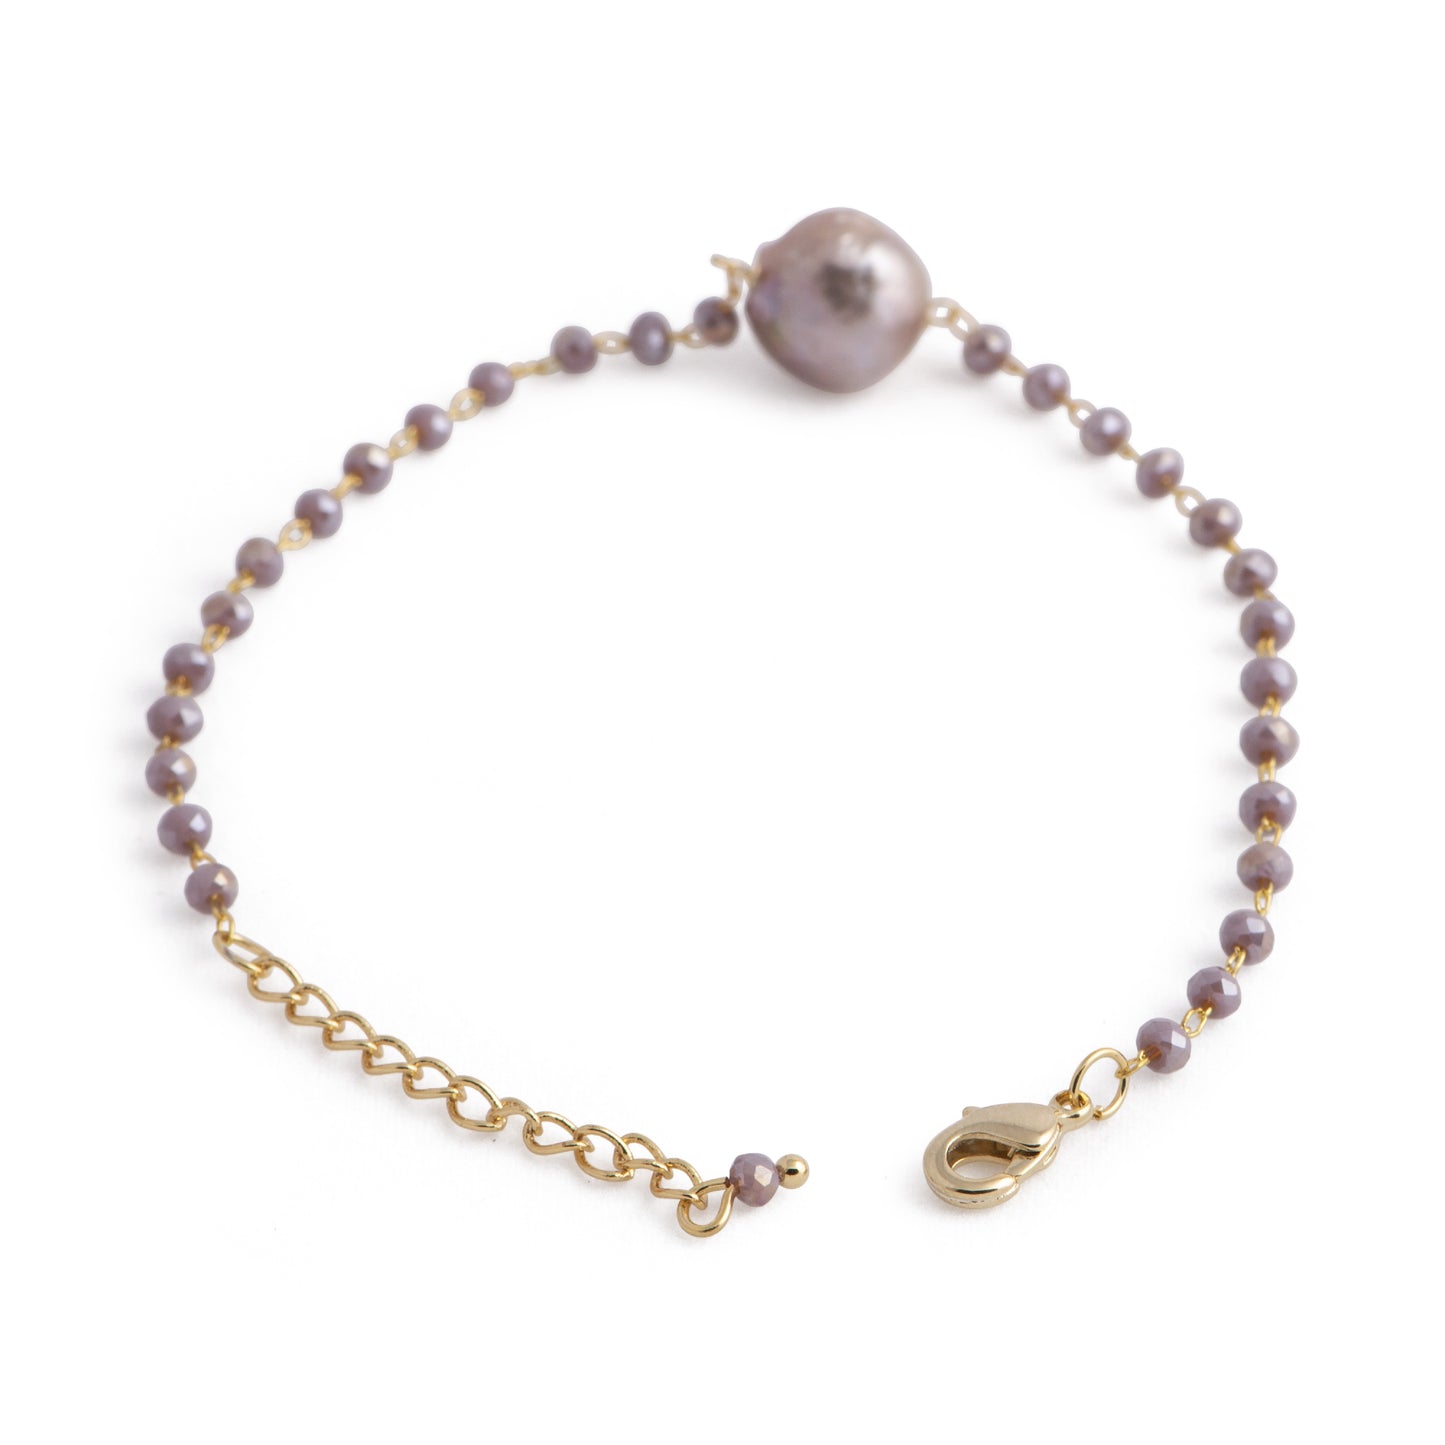 Hudson - Freshwater pearl and crystal bracelet (Clasp)